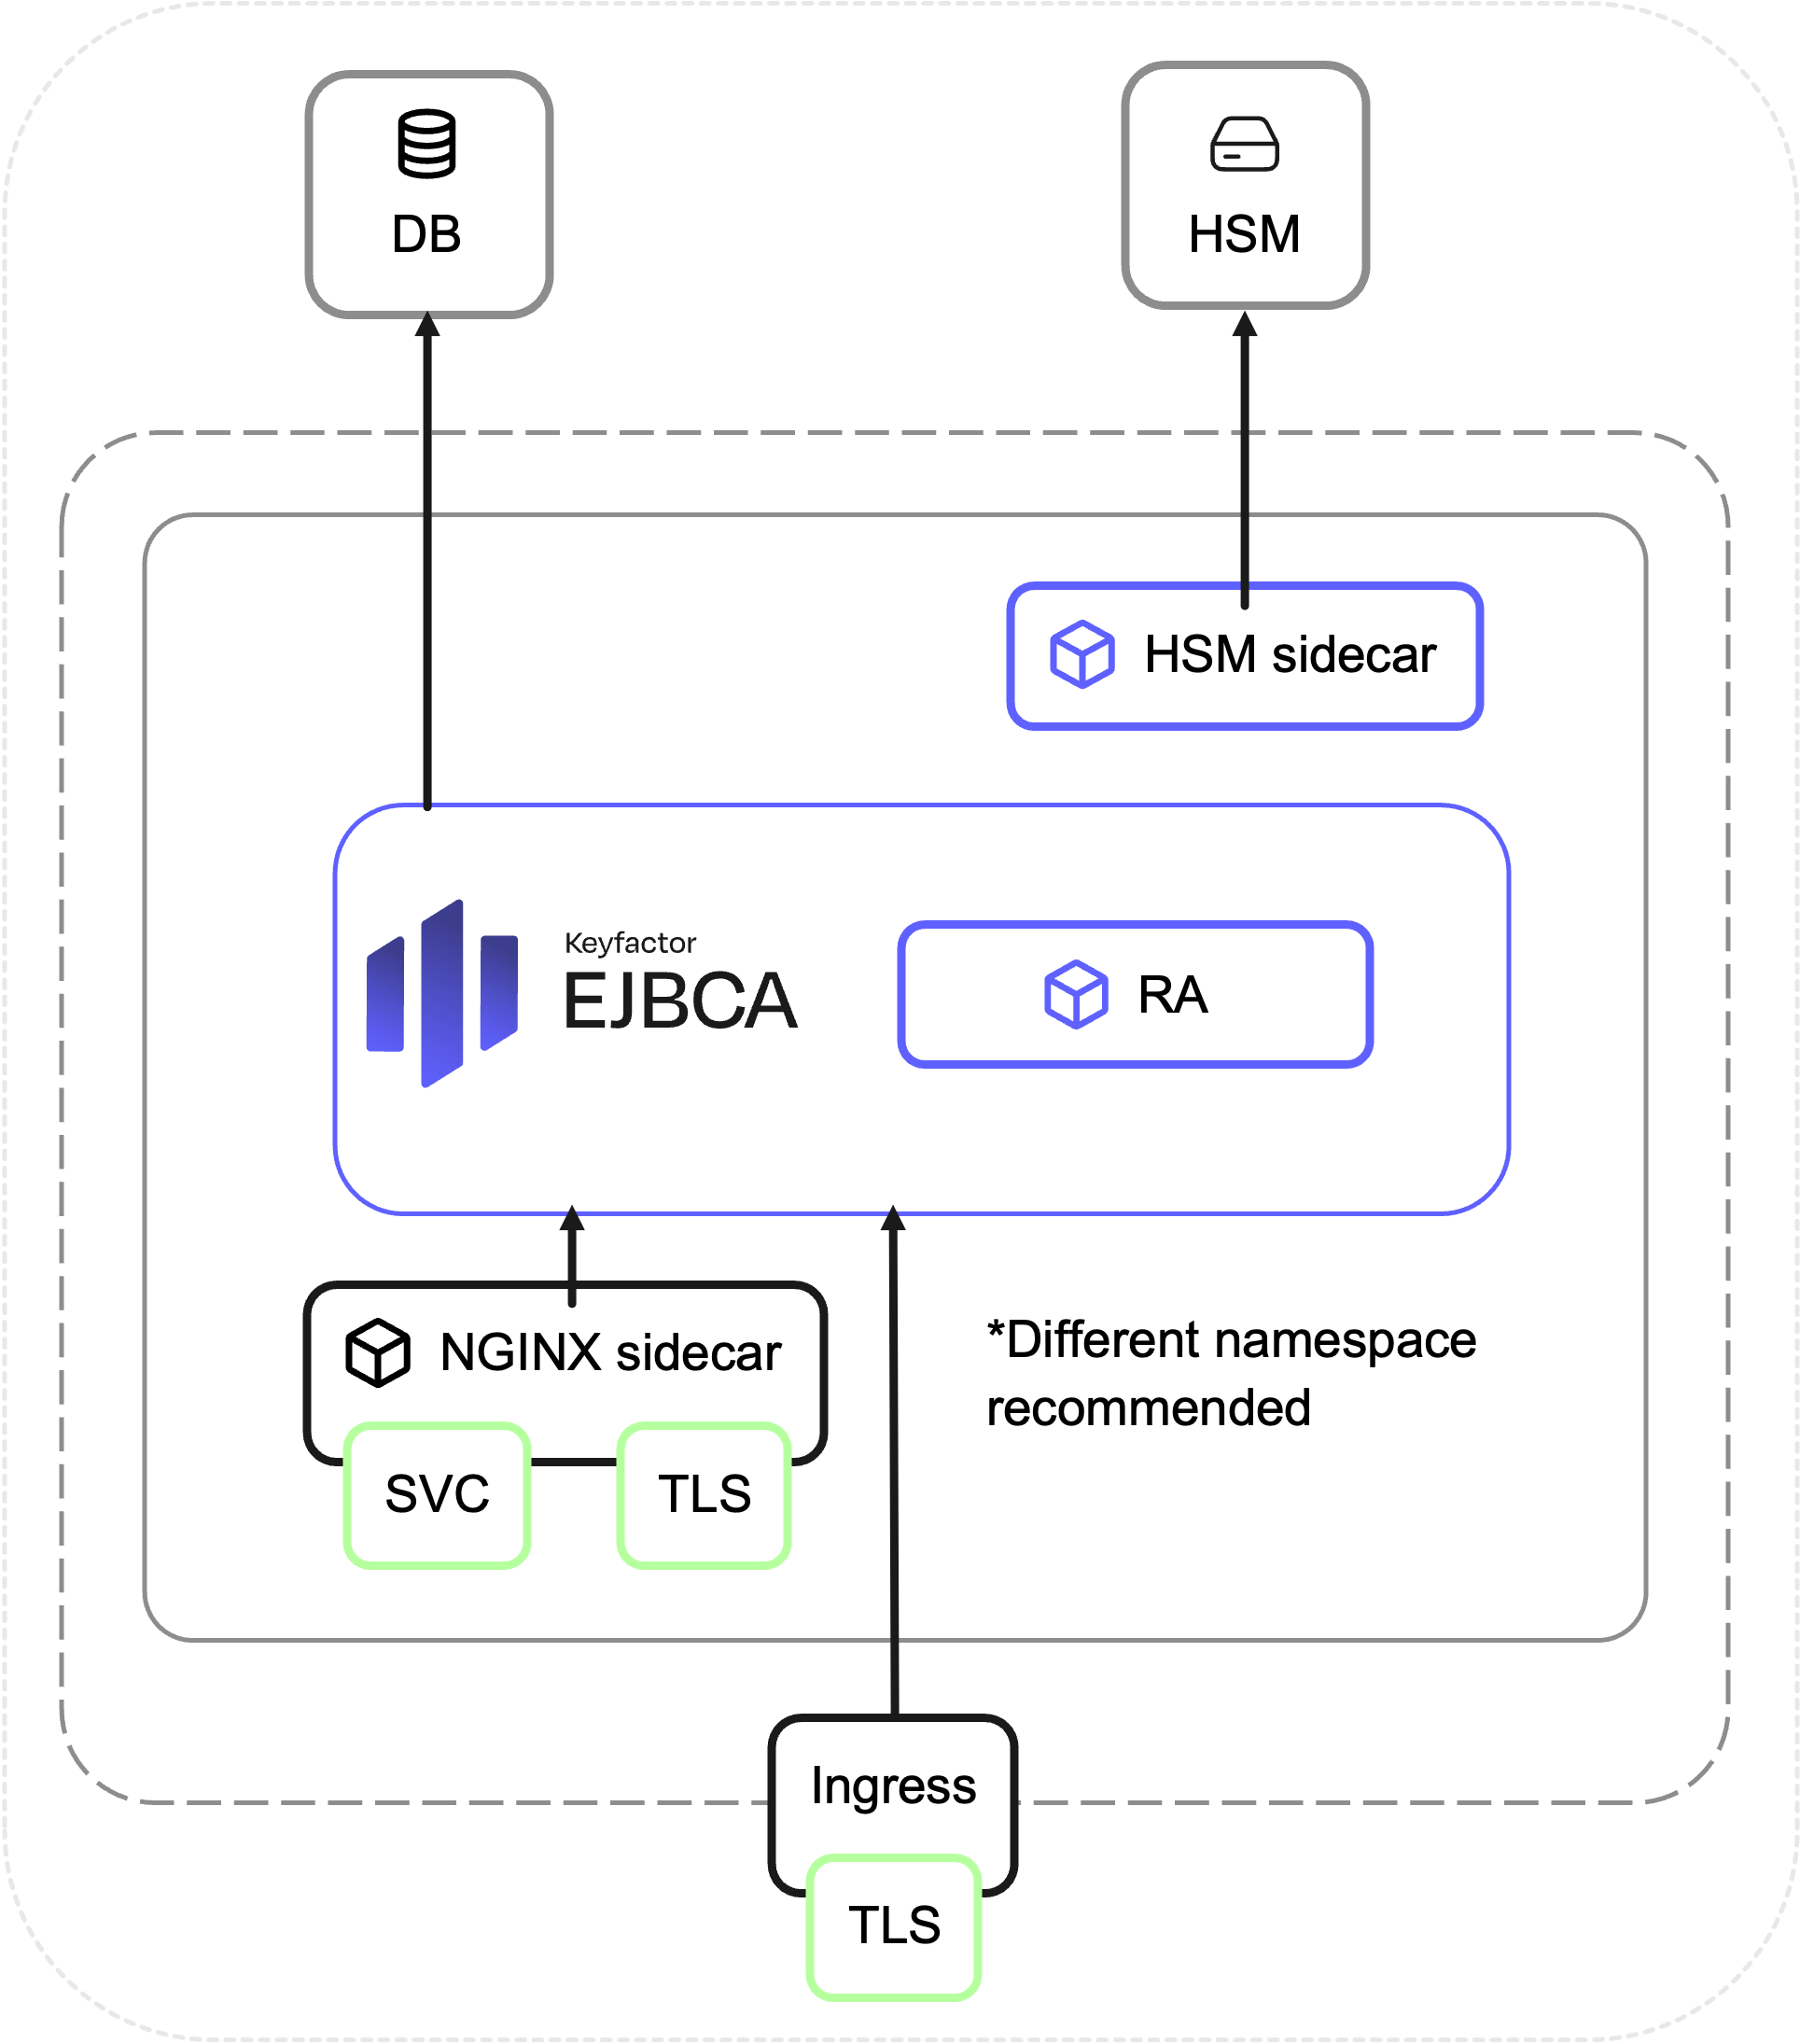 EJBCA-RA-Container-Diagram.png